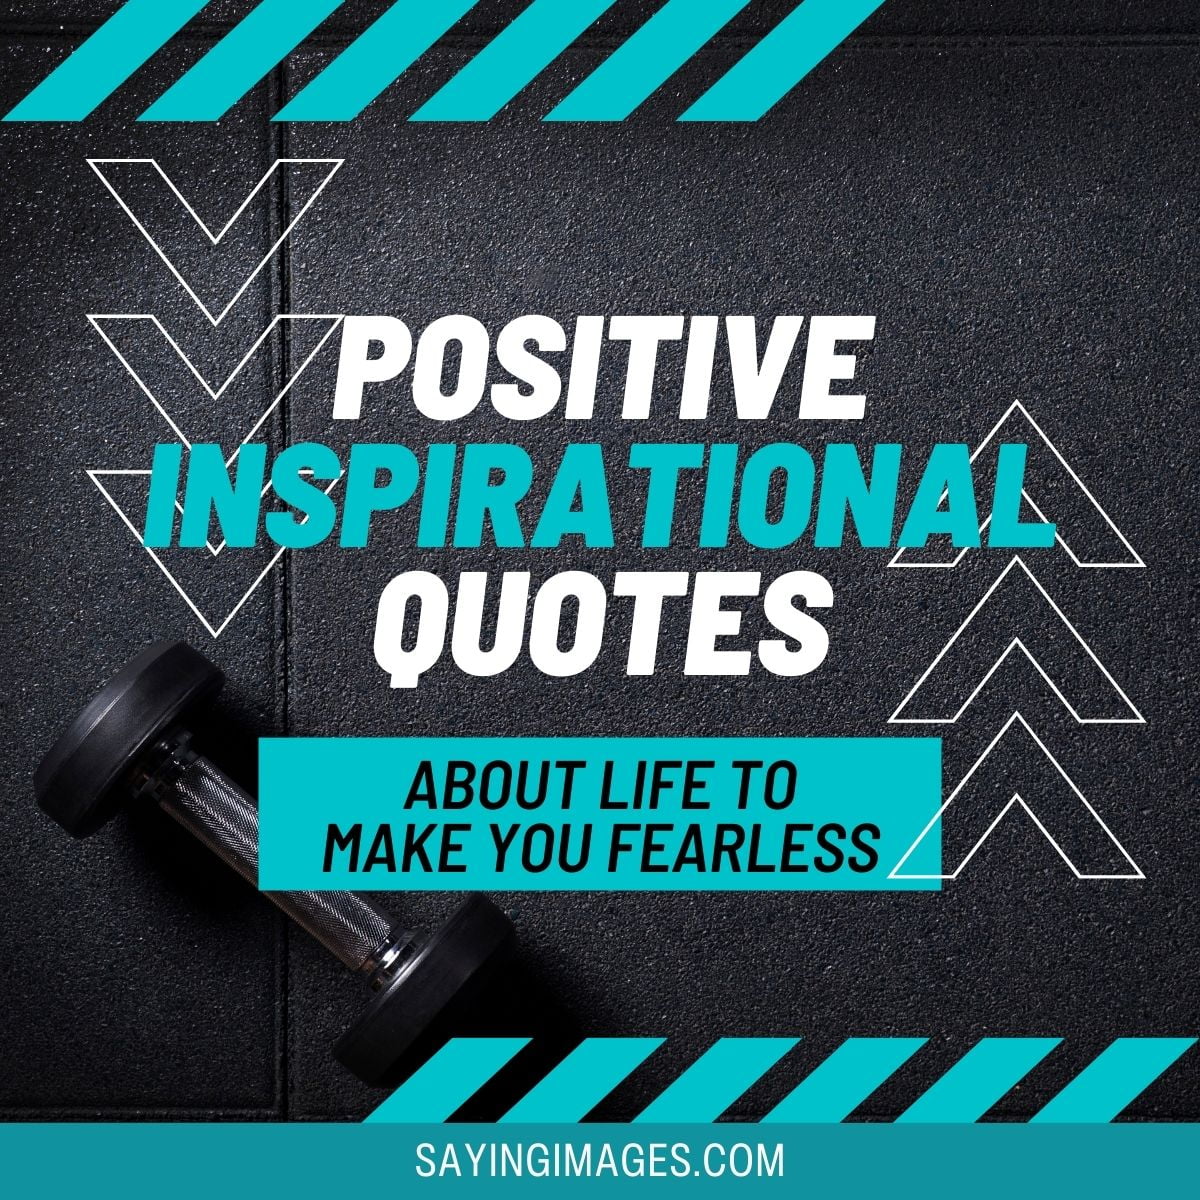 Positive, Inspirational Quotes about Life to Make You Fearless